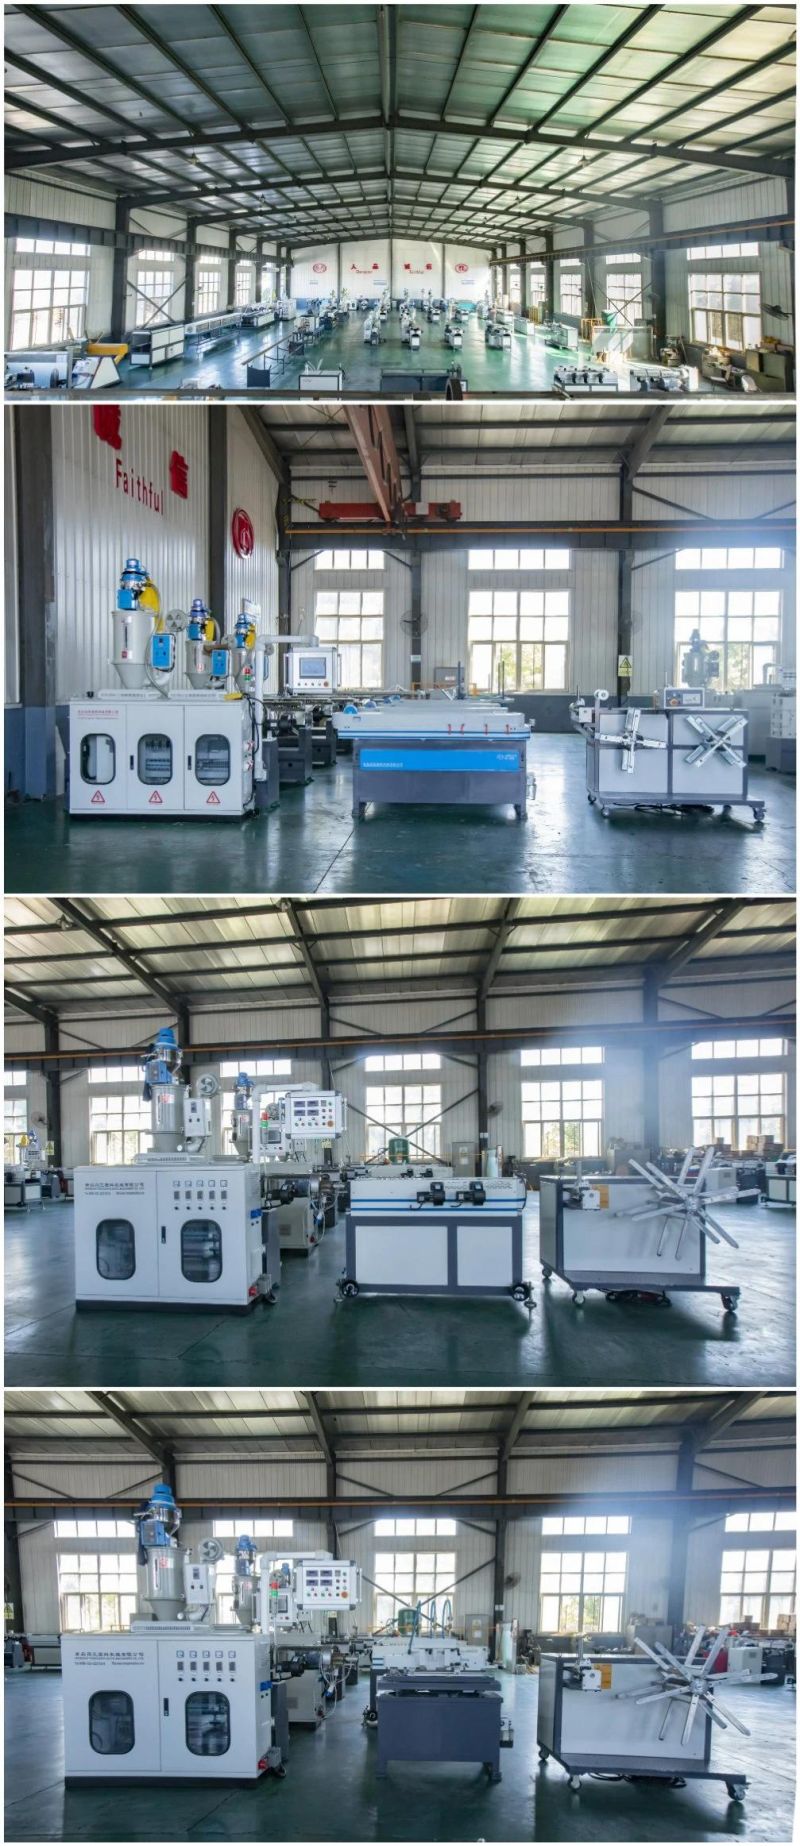 PE/HDPE Plastics Corrugated Pipe Extrusion Line for Electrical Cable, Washing Machine Inlet Hose, Hookah